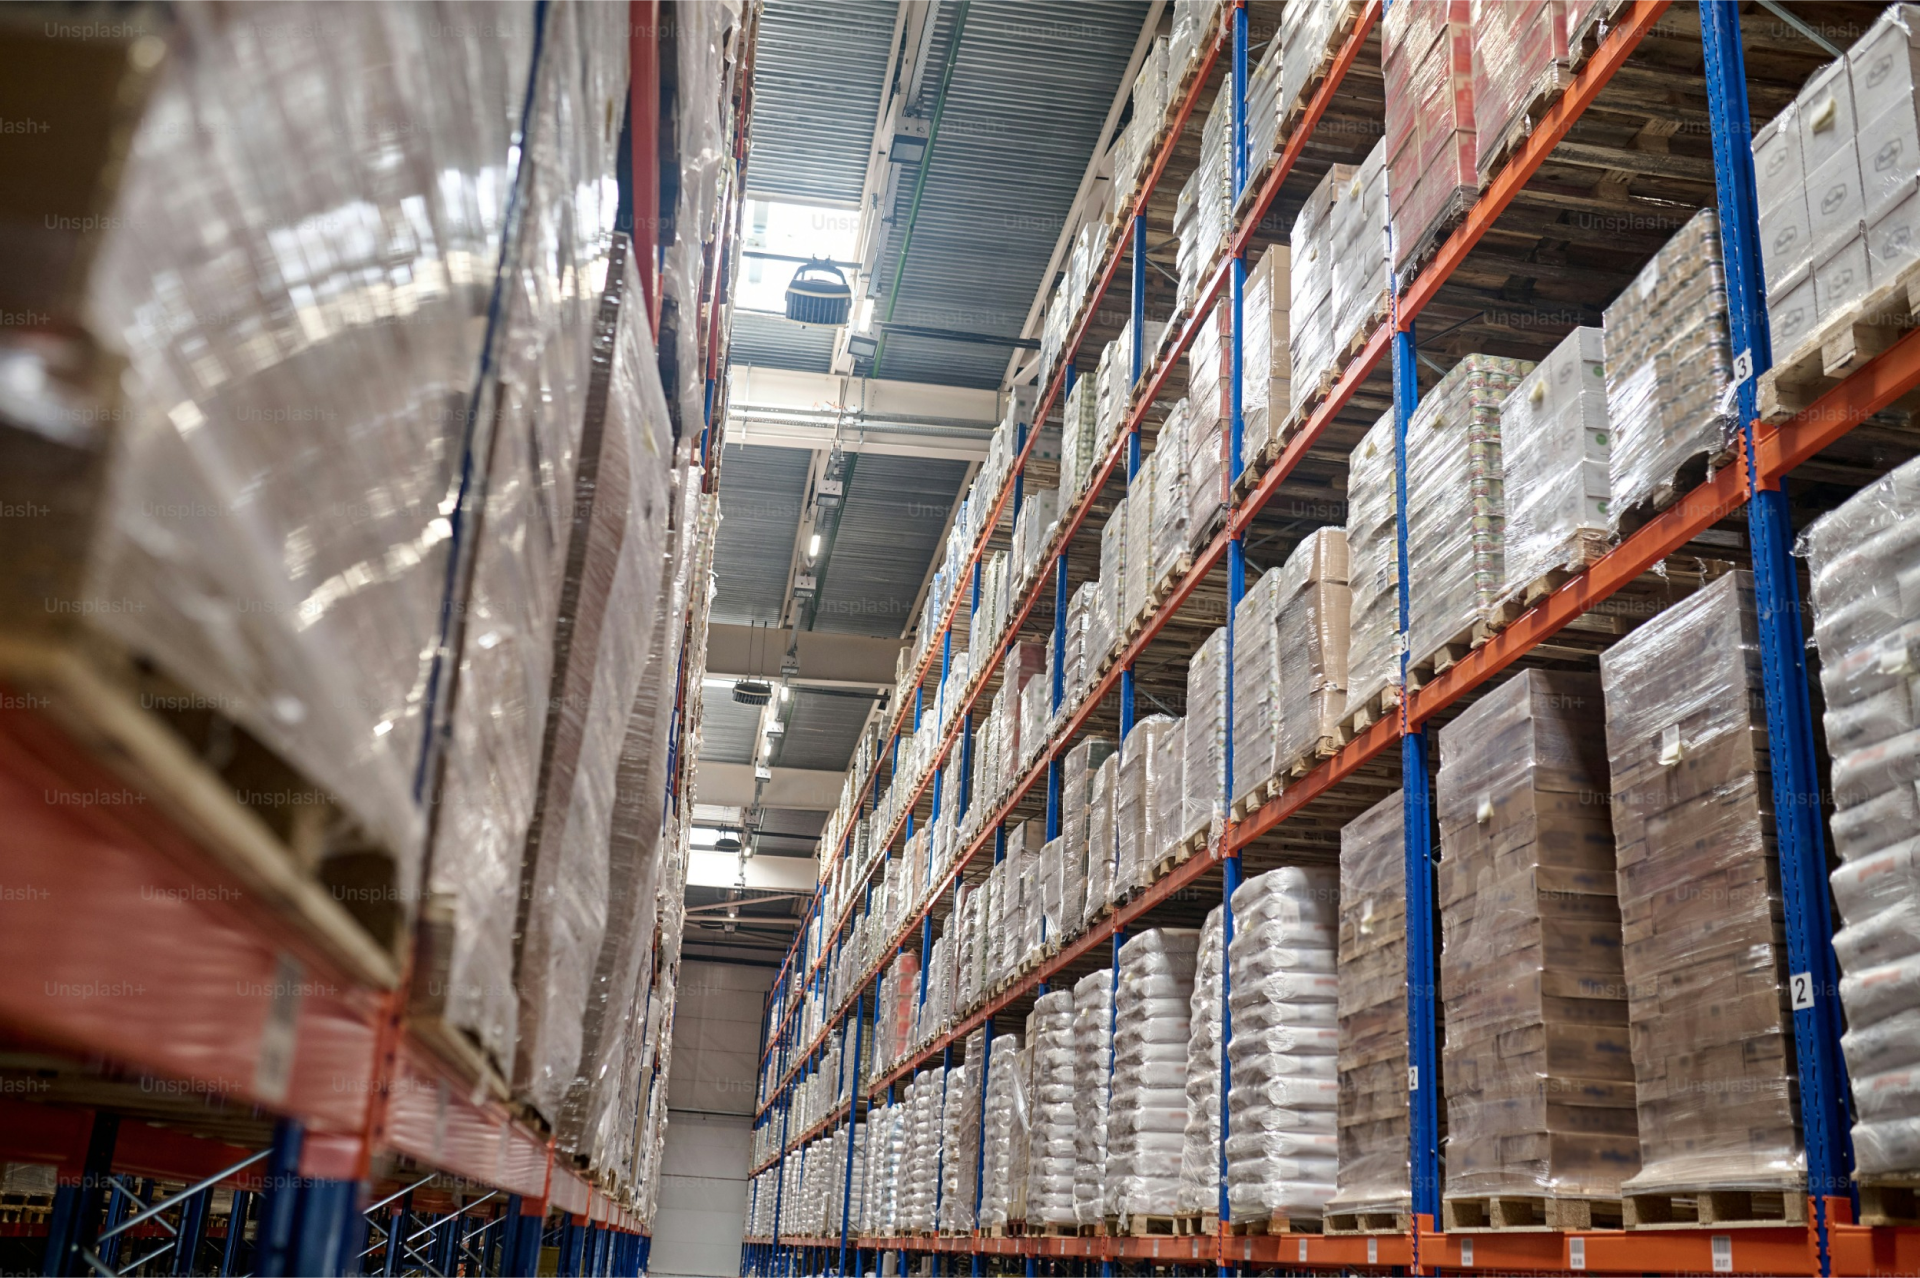 How to Choose a Warehouse Management System (WMS)